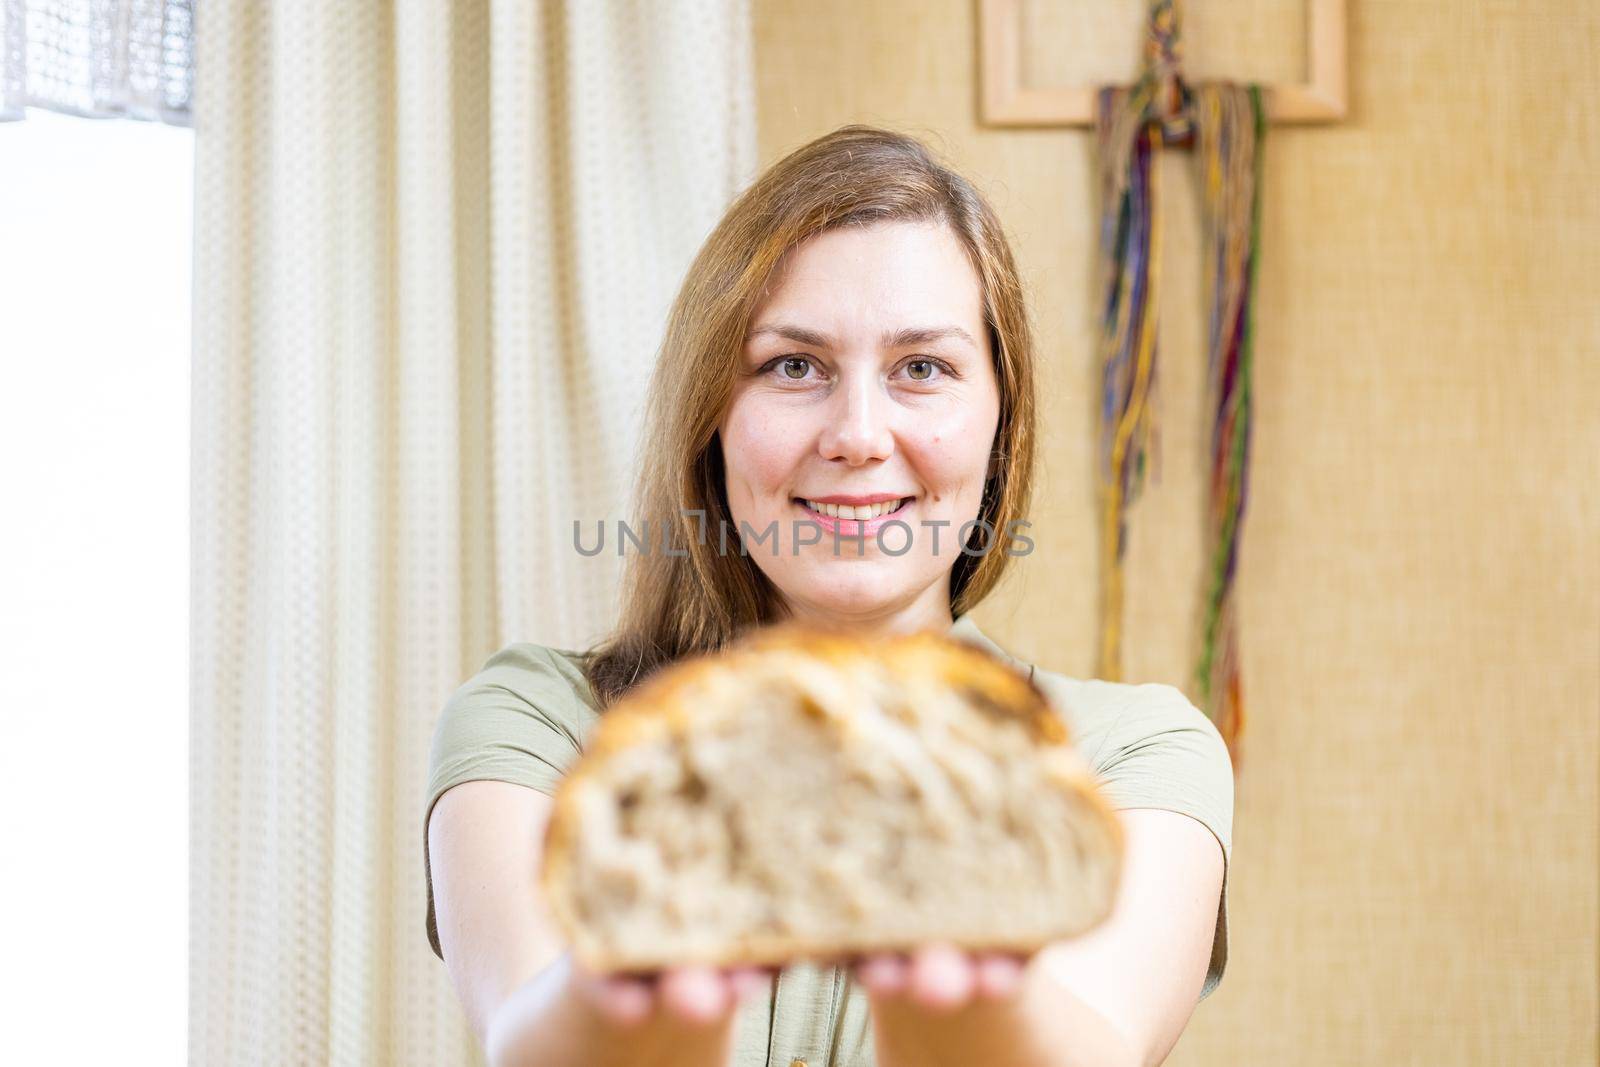 commercial shots, a girl baked bread, she cuts it with a knife, breaks it with her hands, sniffs it, it smells wonderful. association with childhood and parental home.